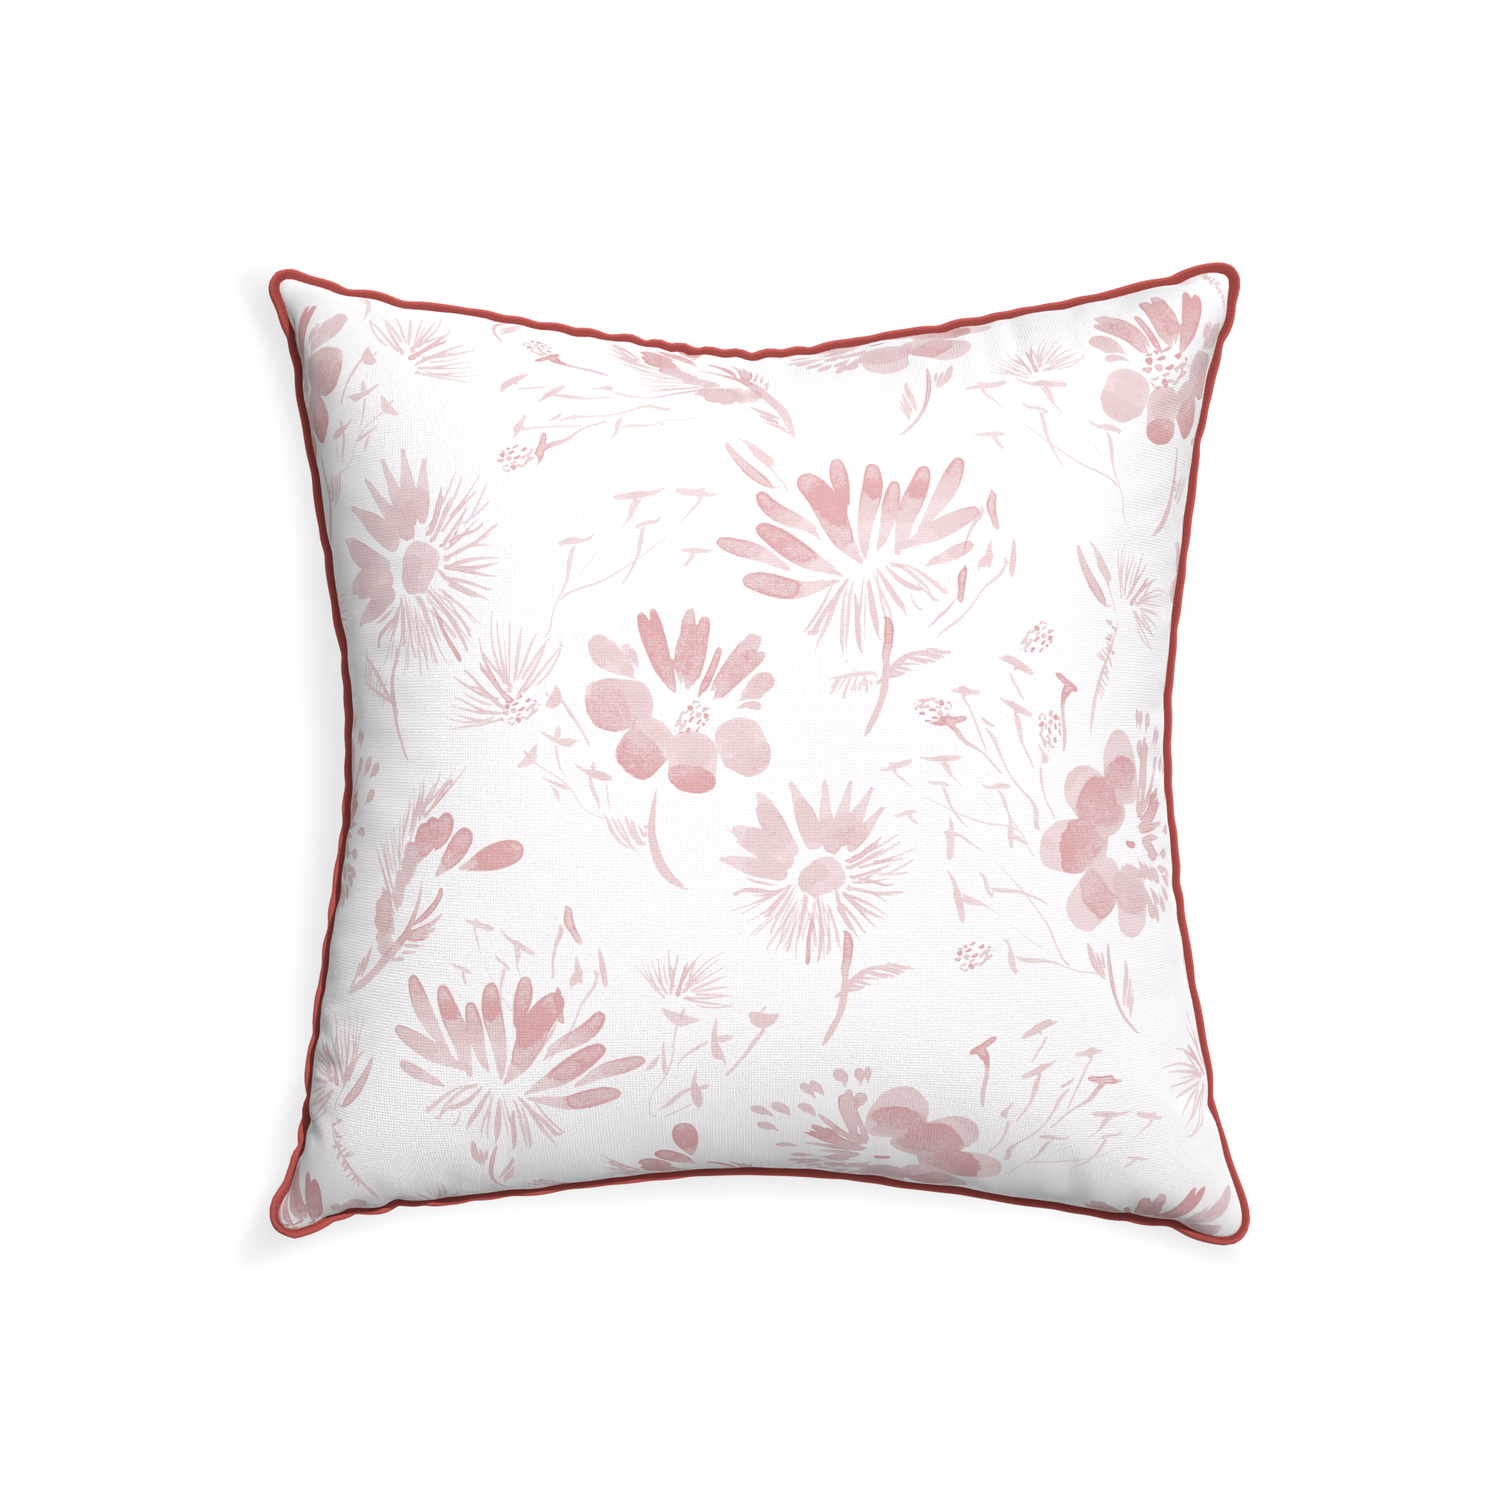 22-square blake custom pillow with c piping on white background